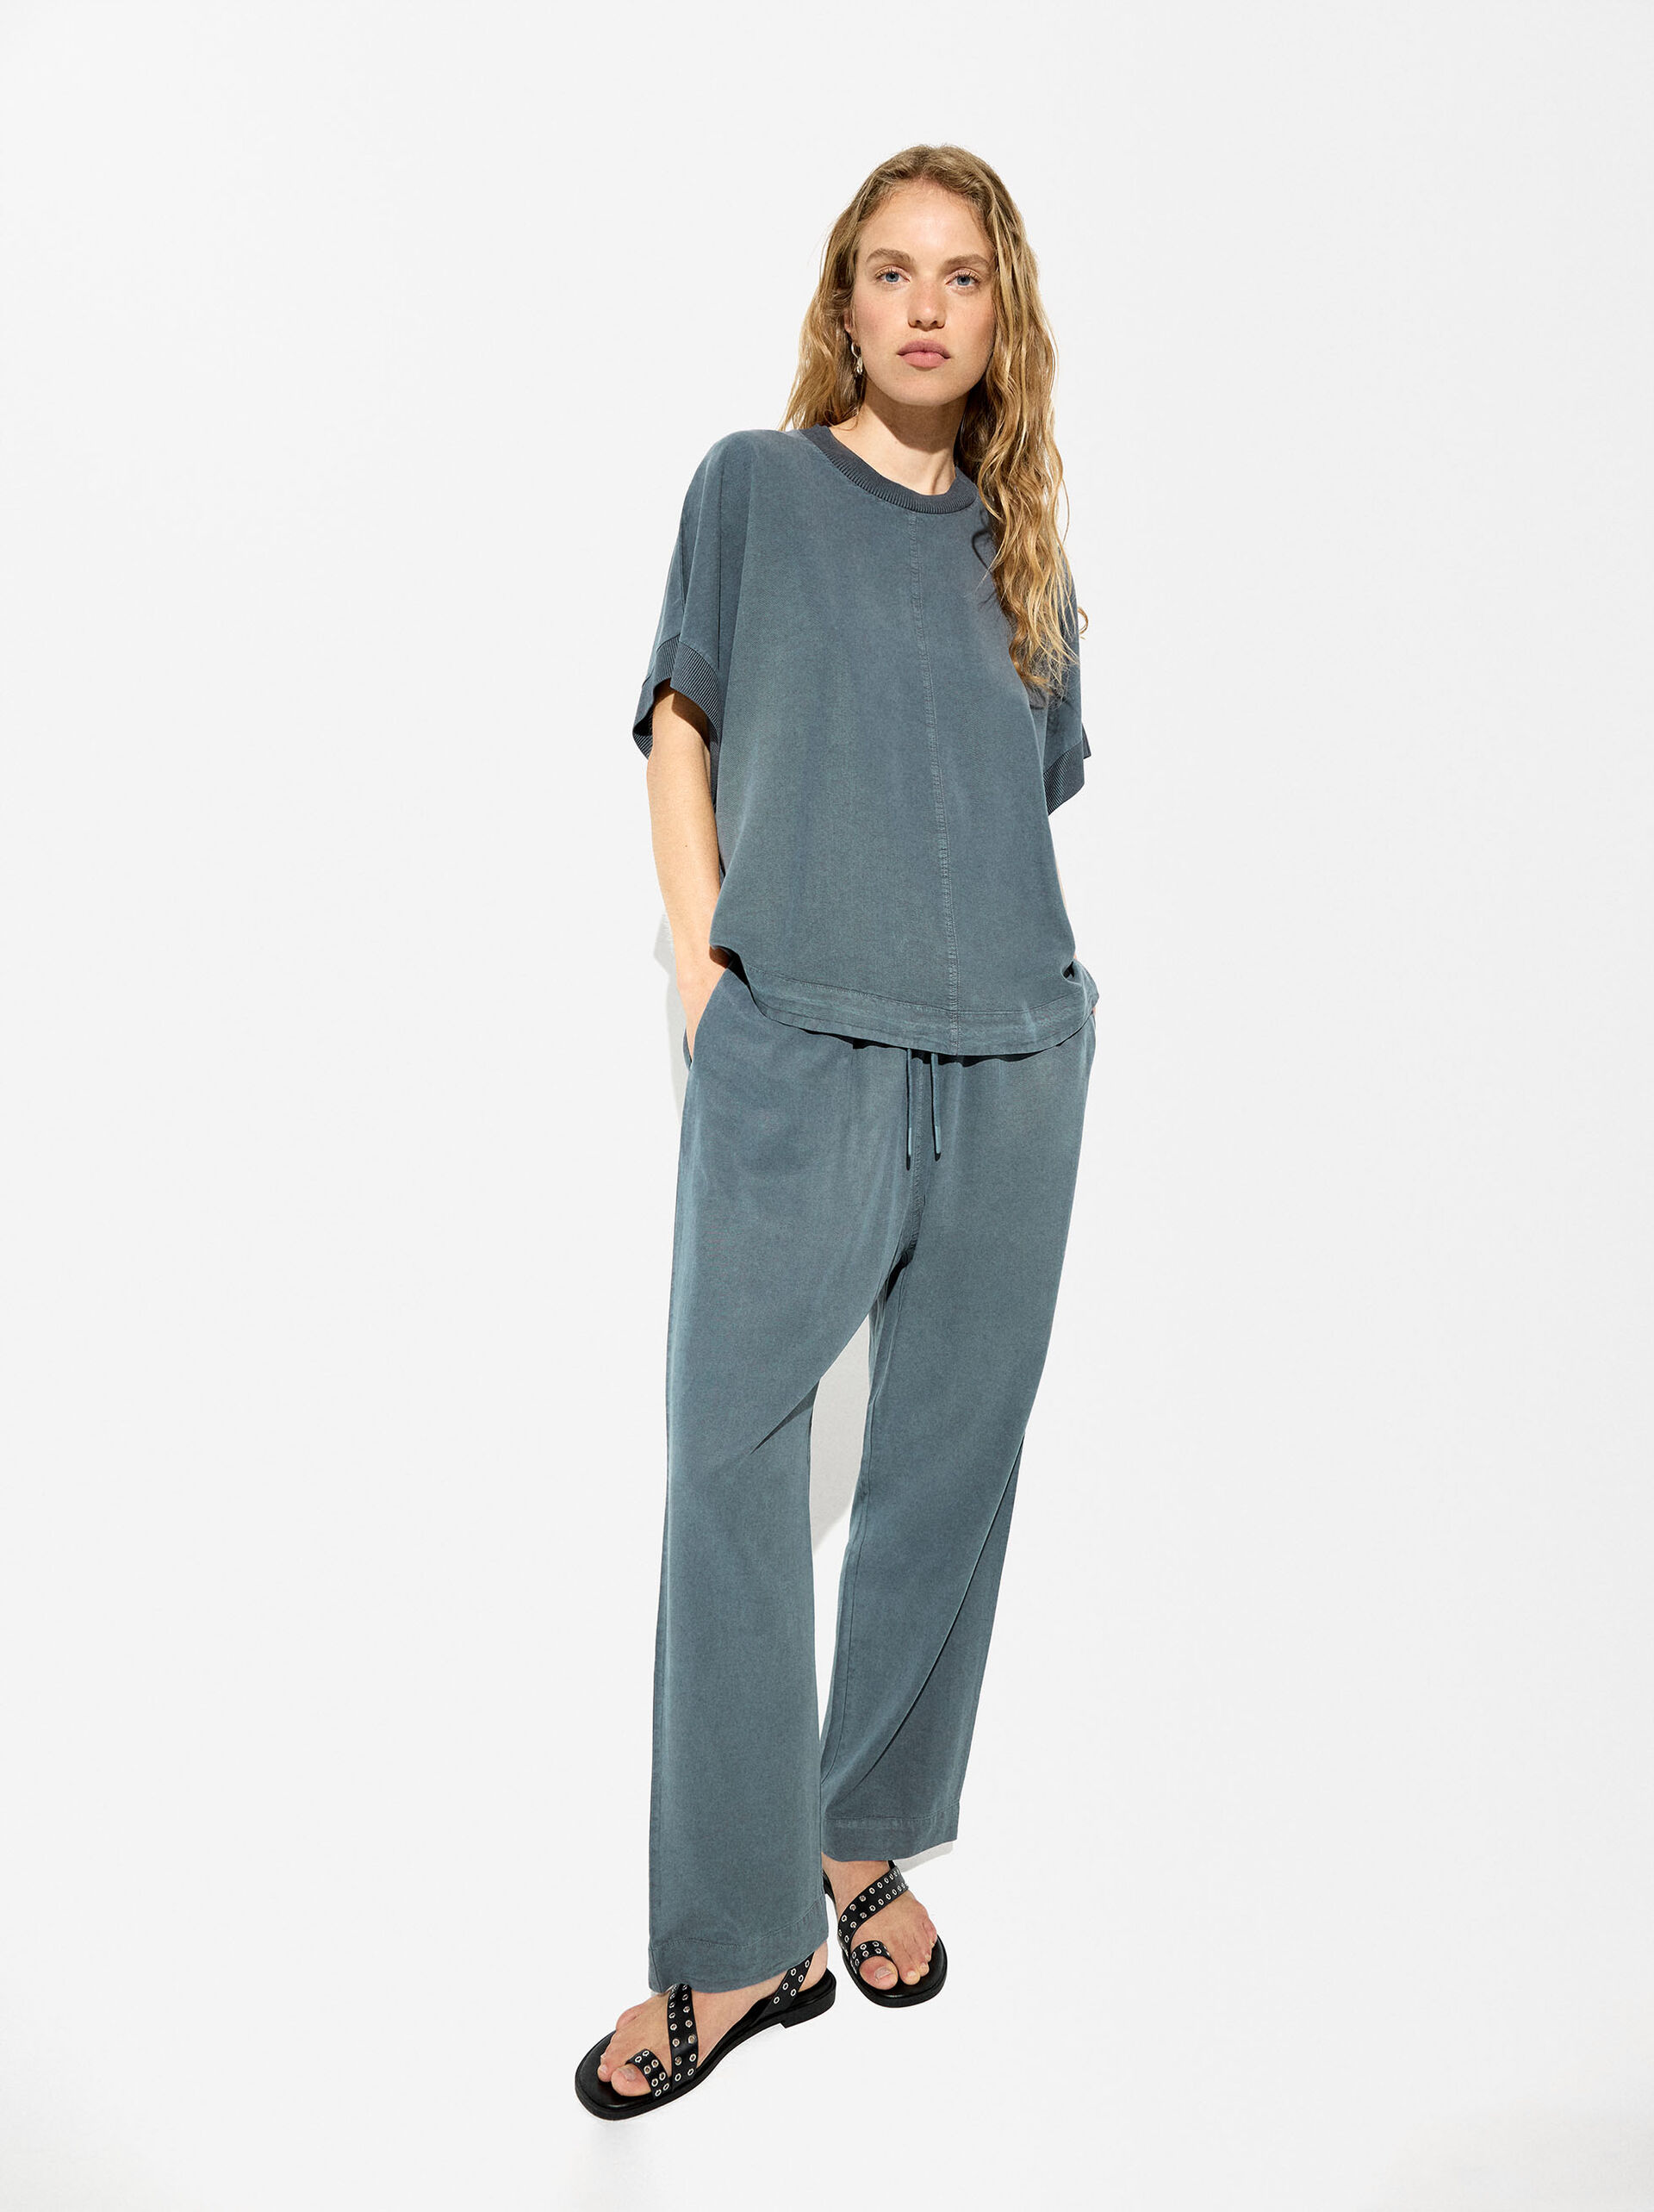 Adjustable Loose-Fitting Trousers Pants With Drawstring image number 4.0